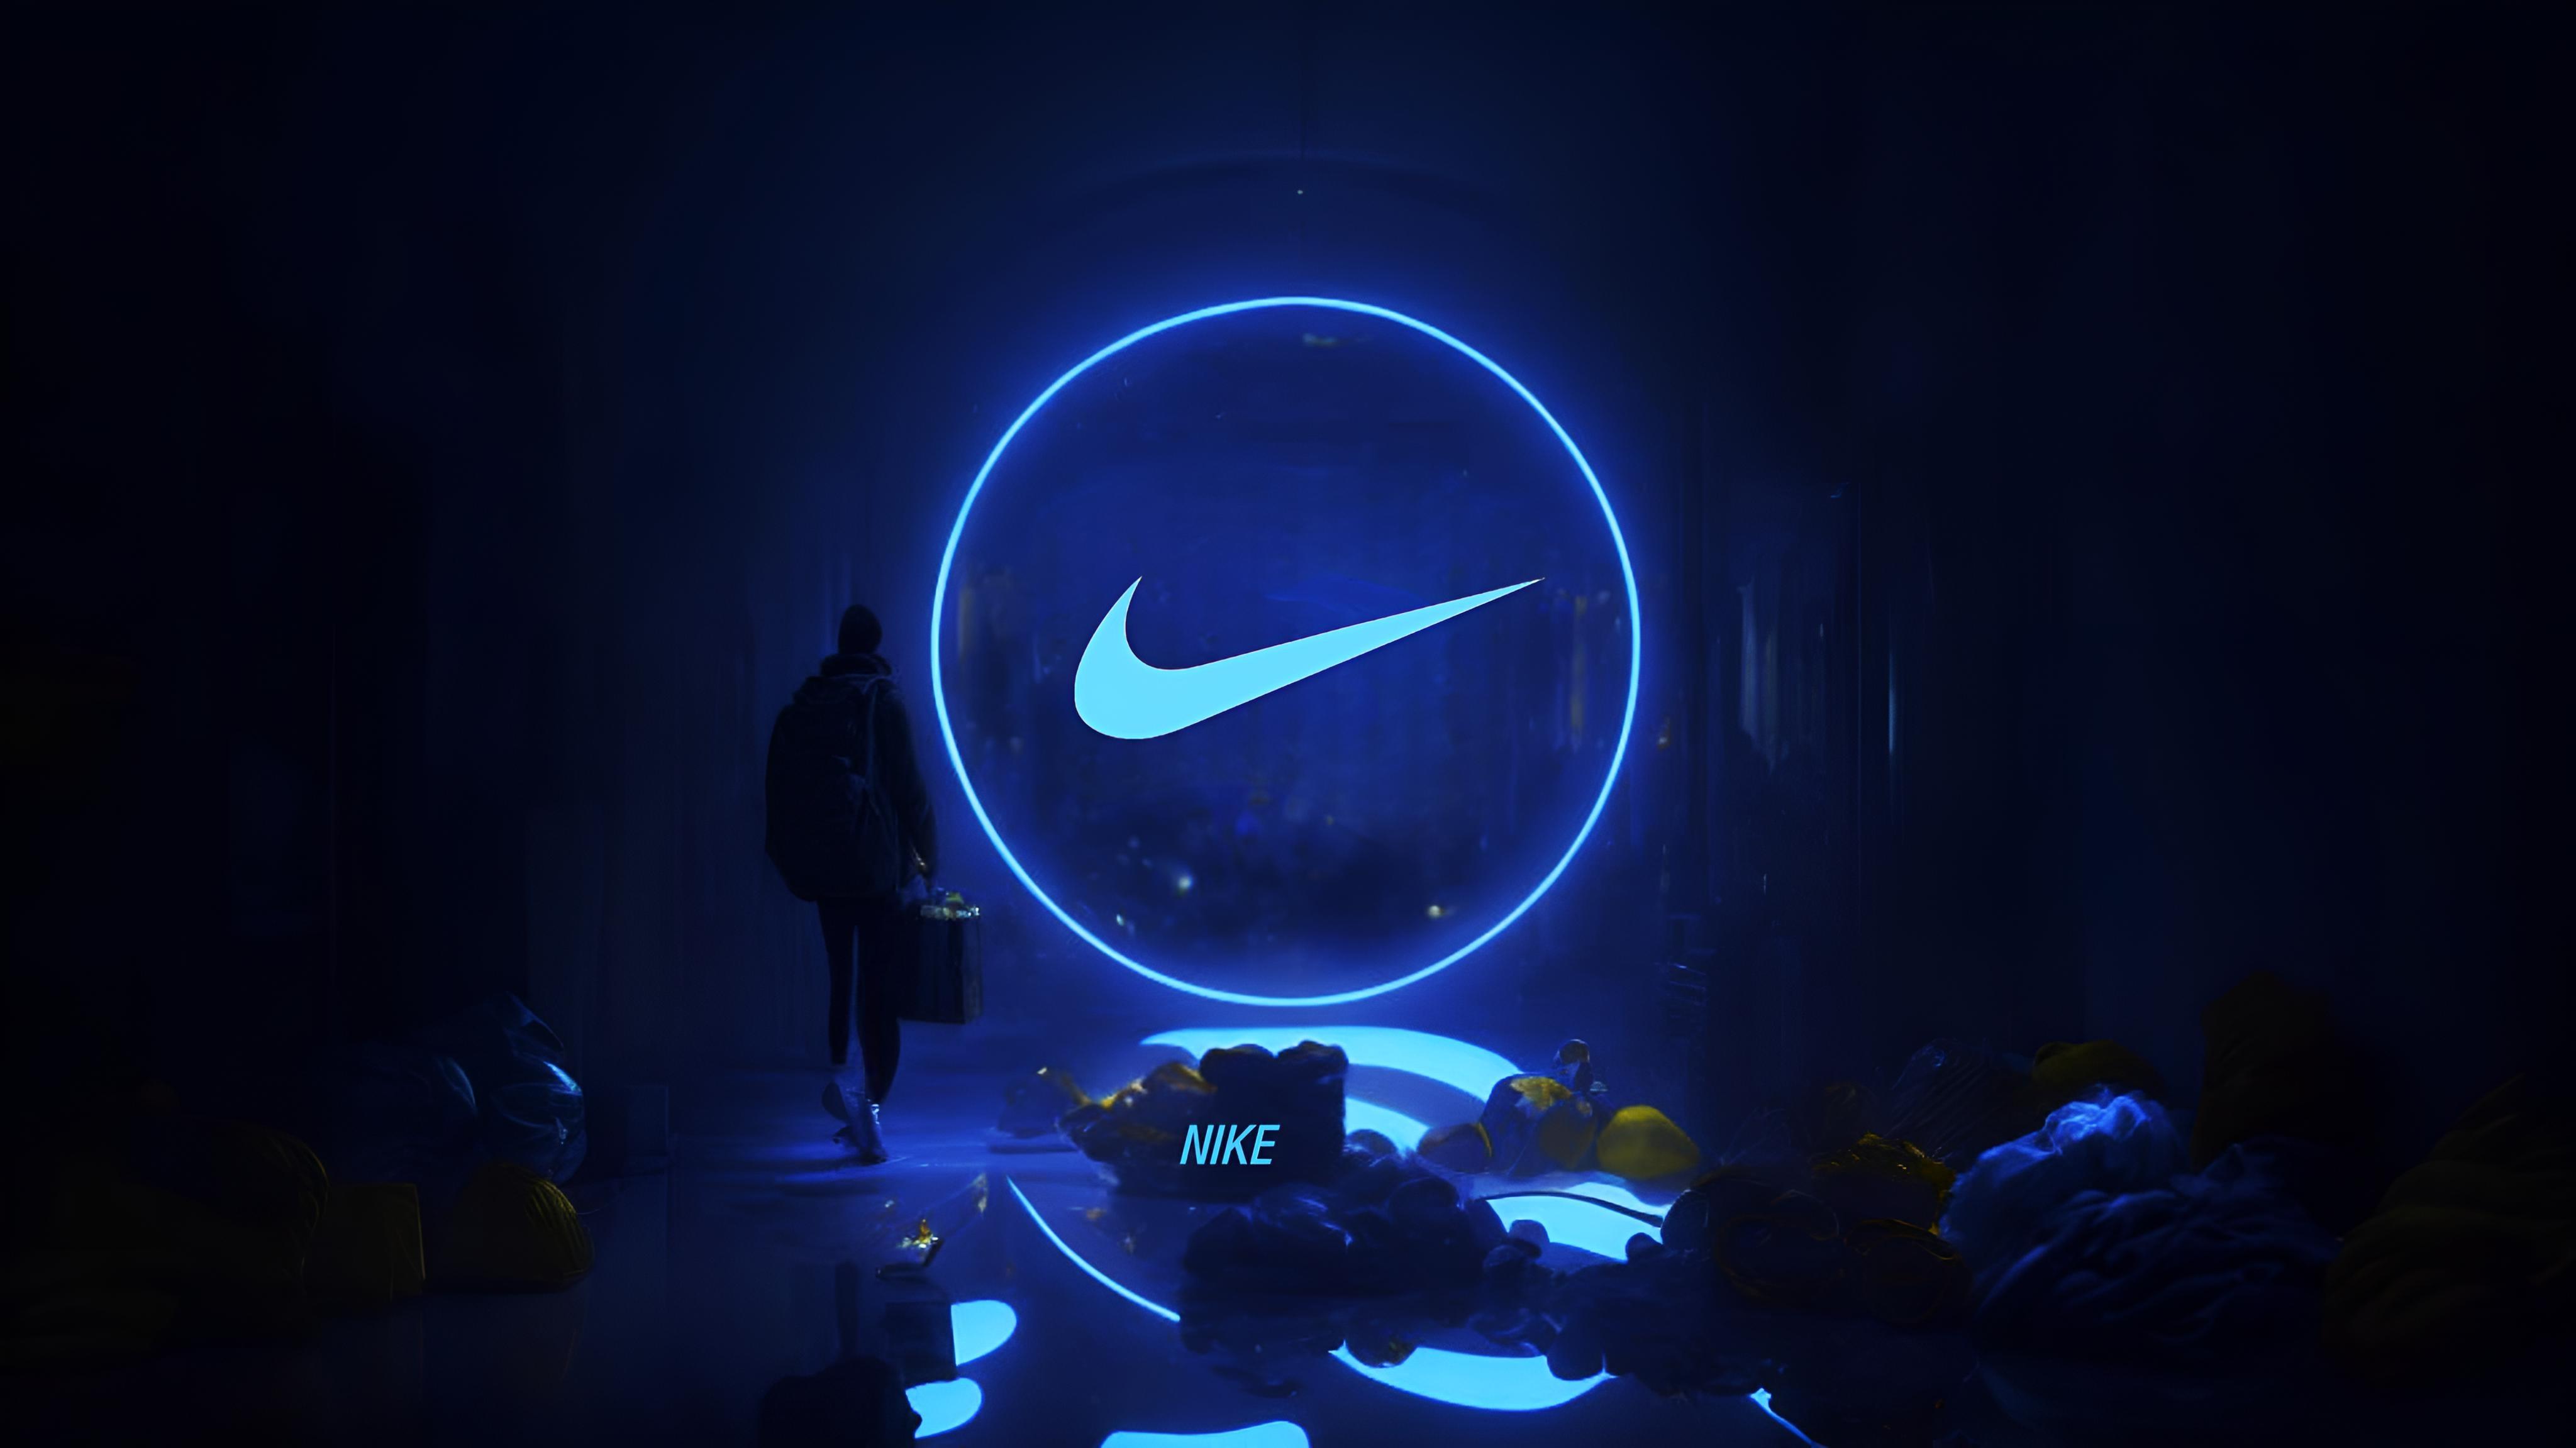  Nike HD Wallpapers and Backgrounds